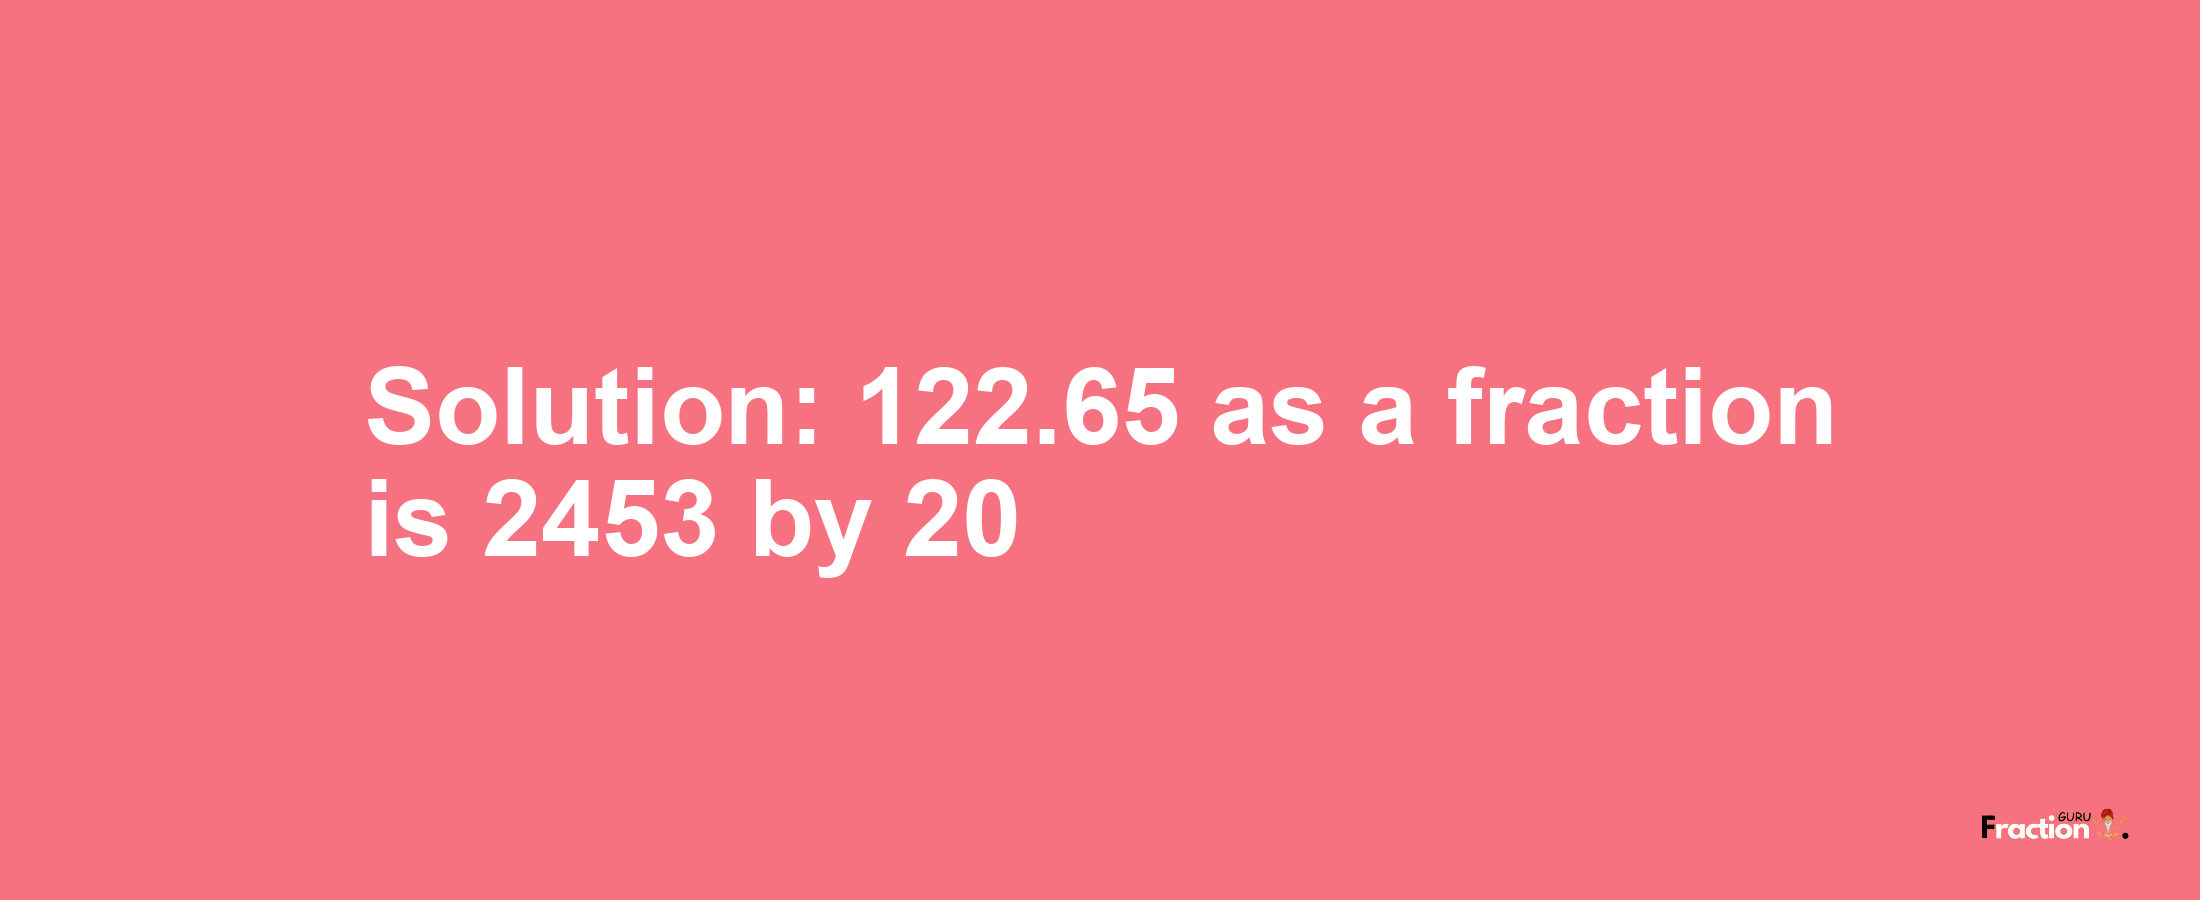 Solution:122.65 as a fraction is 2453/20